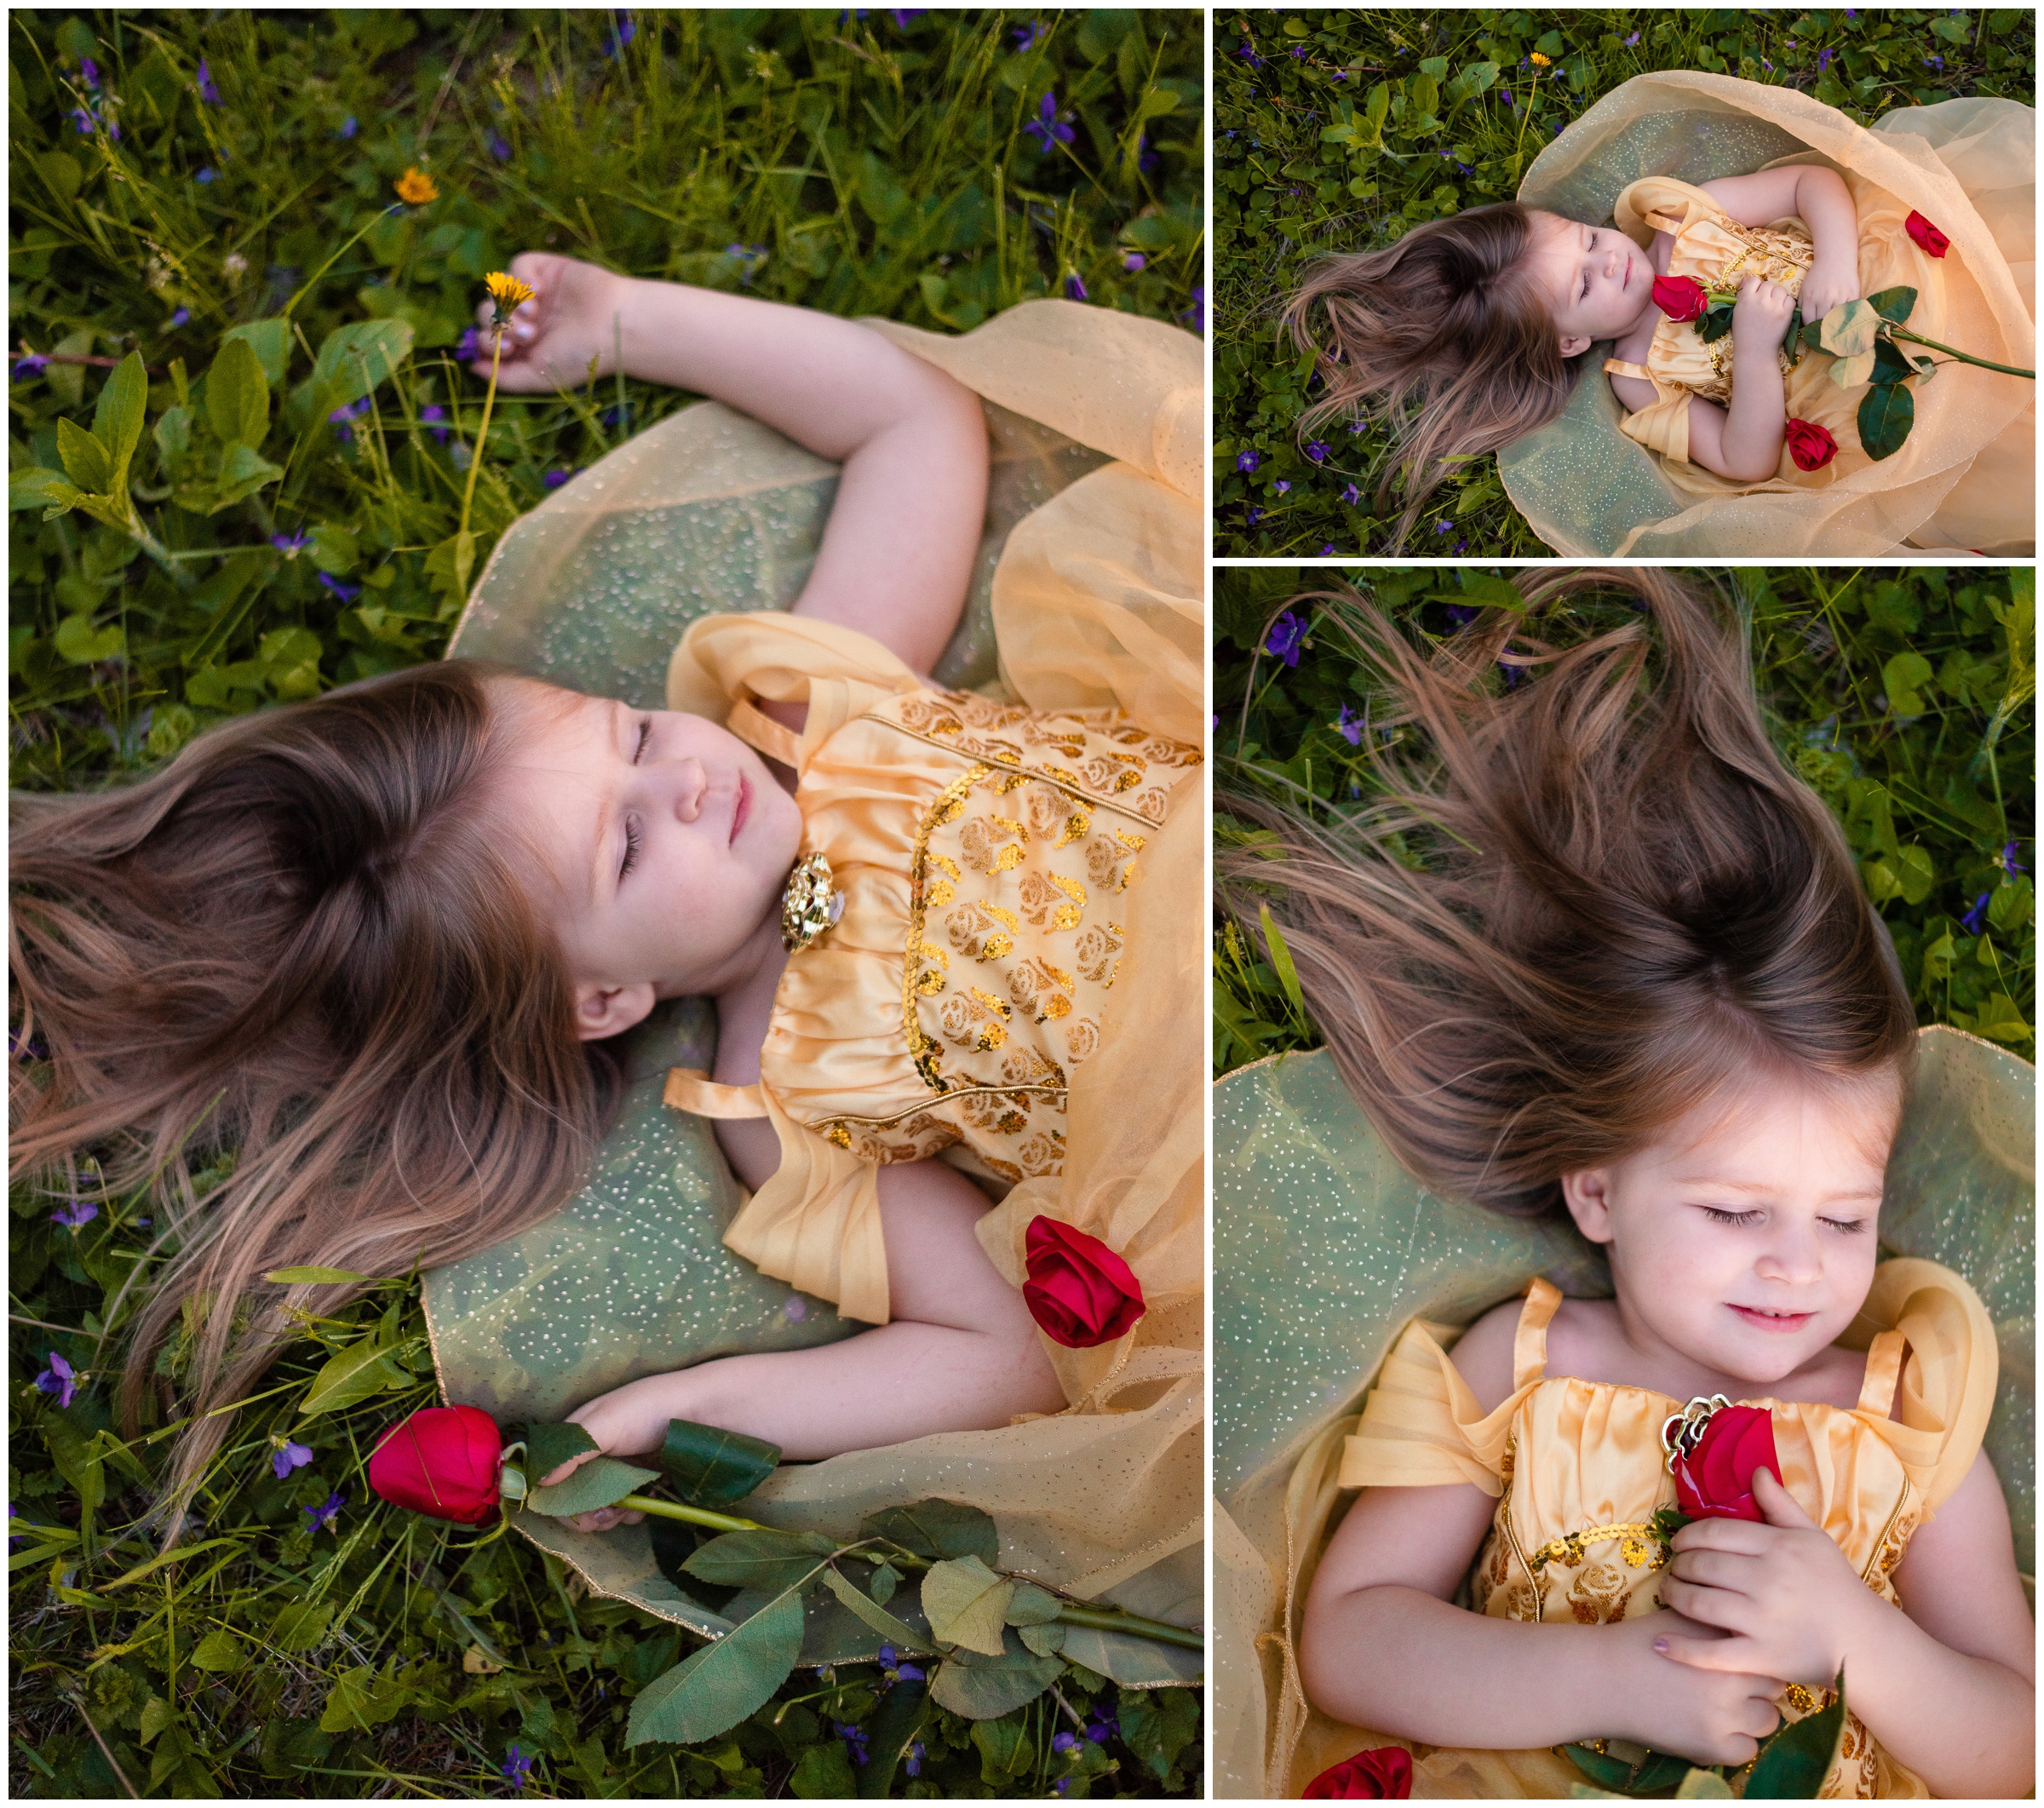 Sleeping Belle with Rose in forest